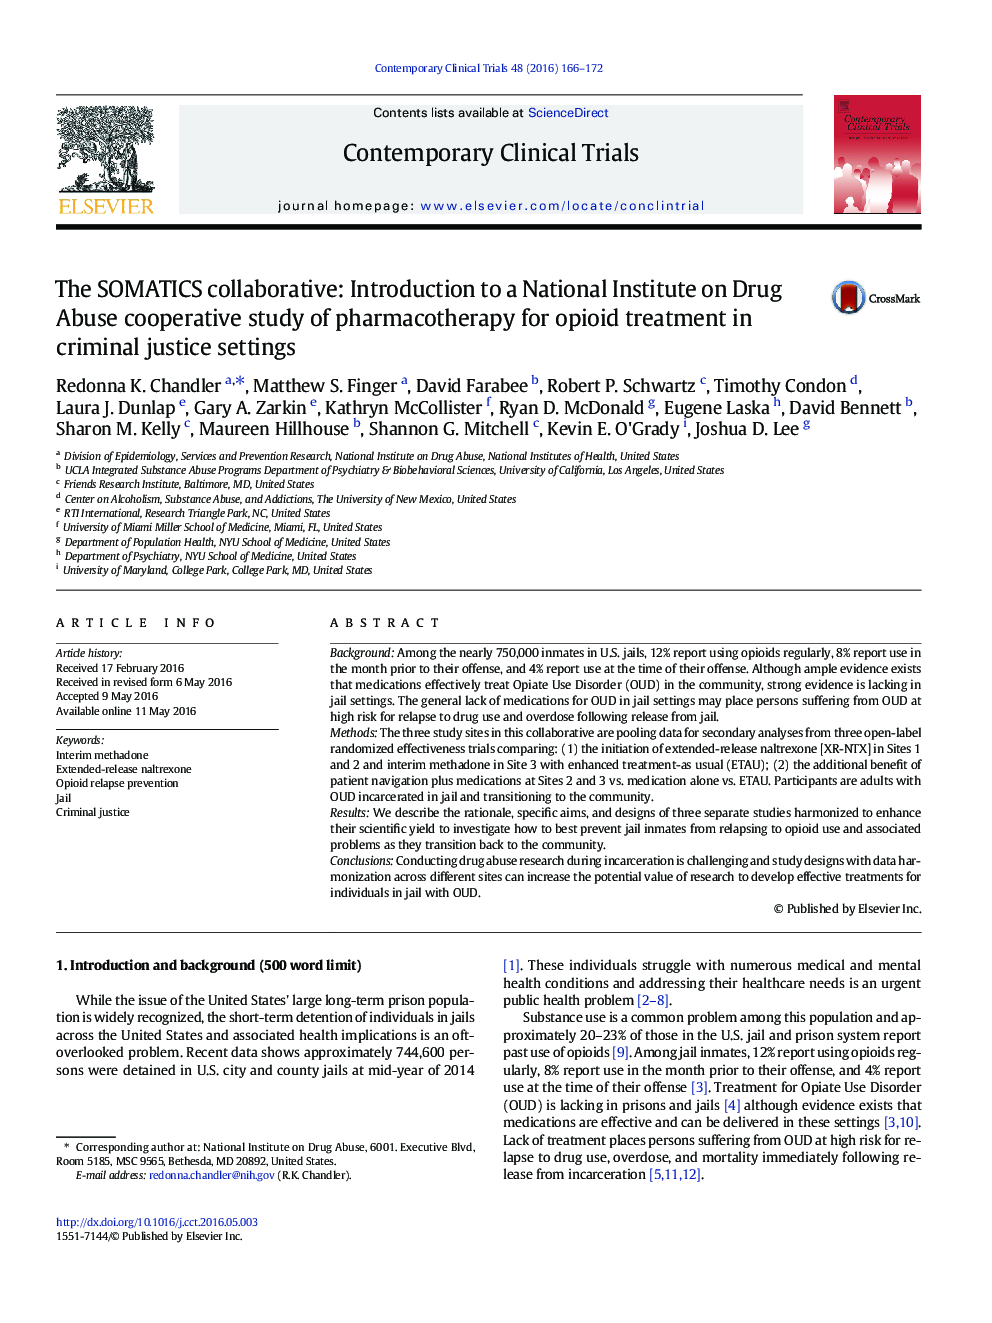 The SOMATICS collaborative: Introduction to a National Institute on Drug Abuse cooperative study of pharmacotherapy for opioid treatment in criminal justice settings